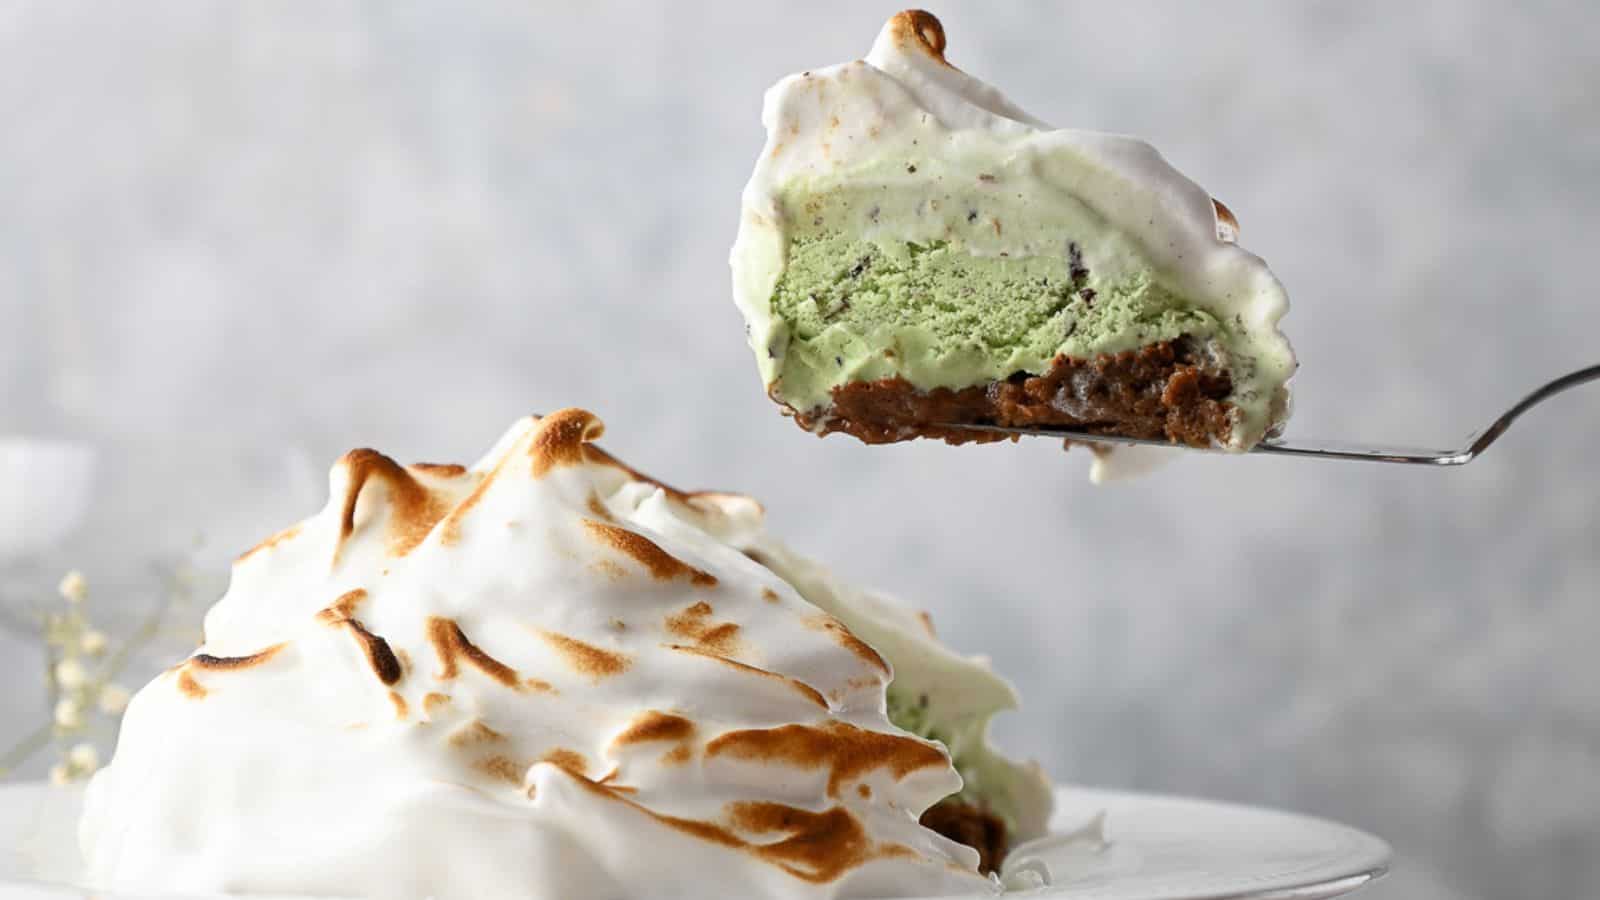 <p>A dessert that’s as entertaining as it is tasty. Ice cream, meringue, and cake combined? It’s sure to amaze every member of the family.<br><strong>Get the Recipe: </strong><a href="https://www.splashoftaste.com/baked-alaska/?utm_source=msn&utm_medium=page&utm_campaign=msn">Baked Alaska</a></p>